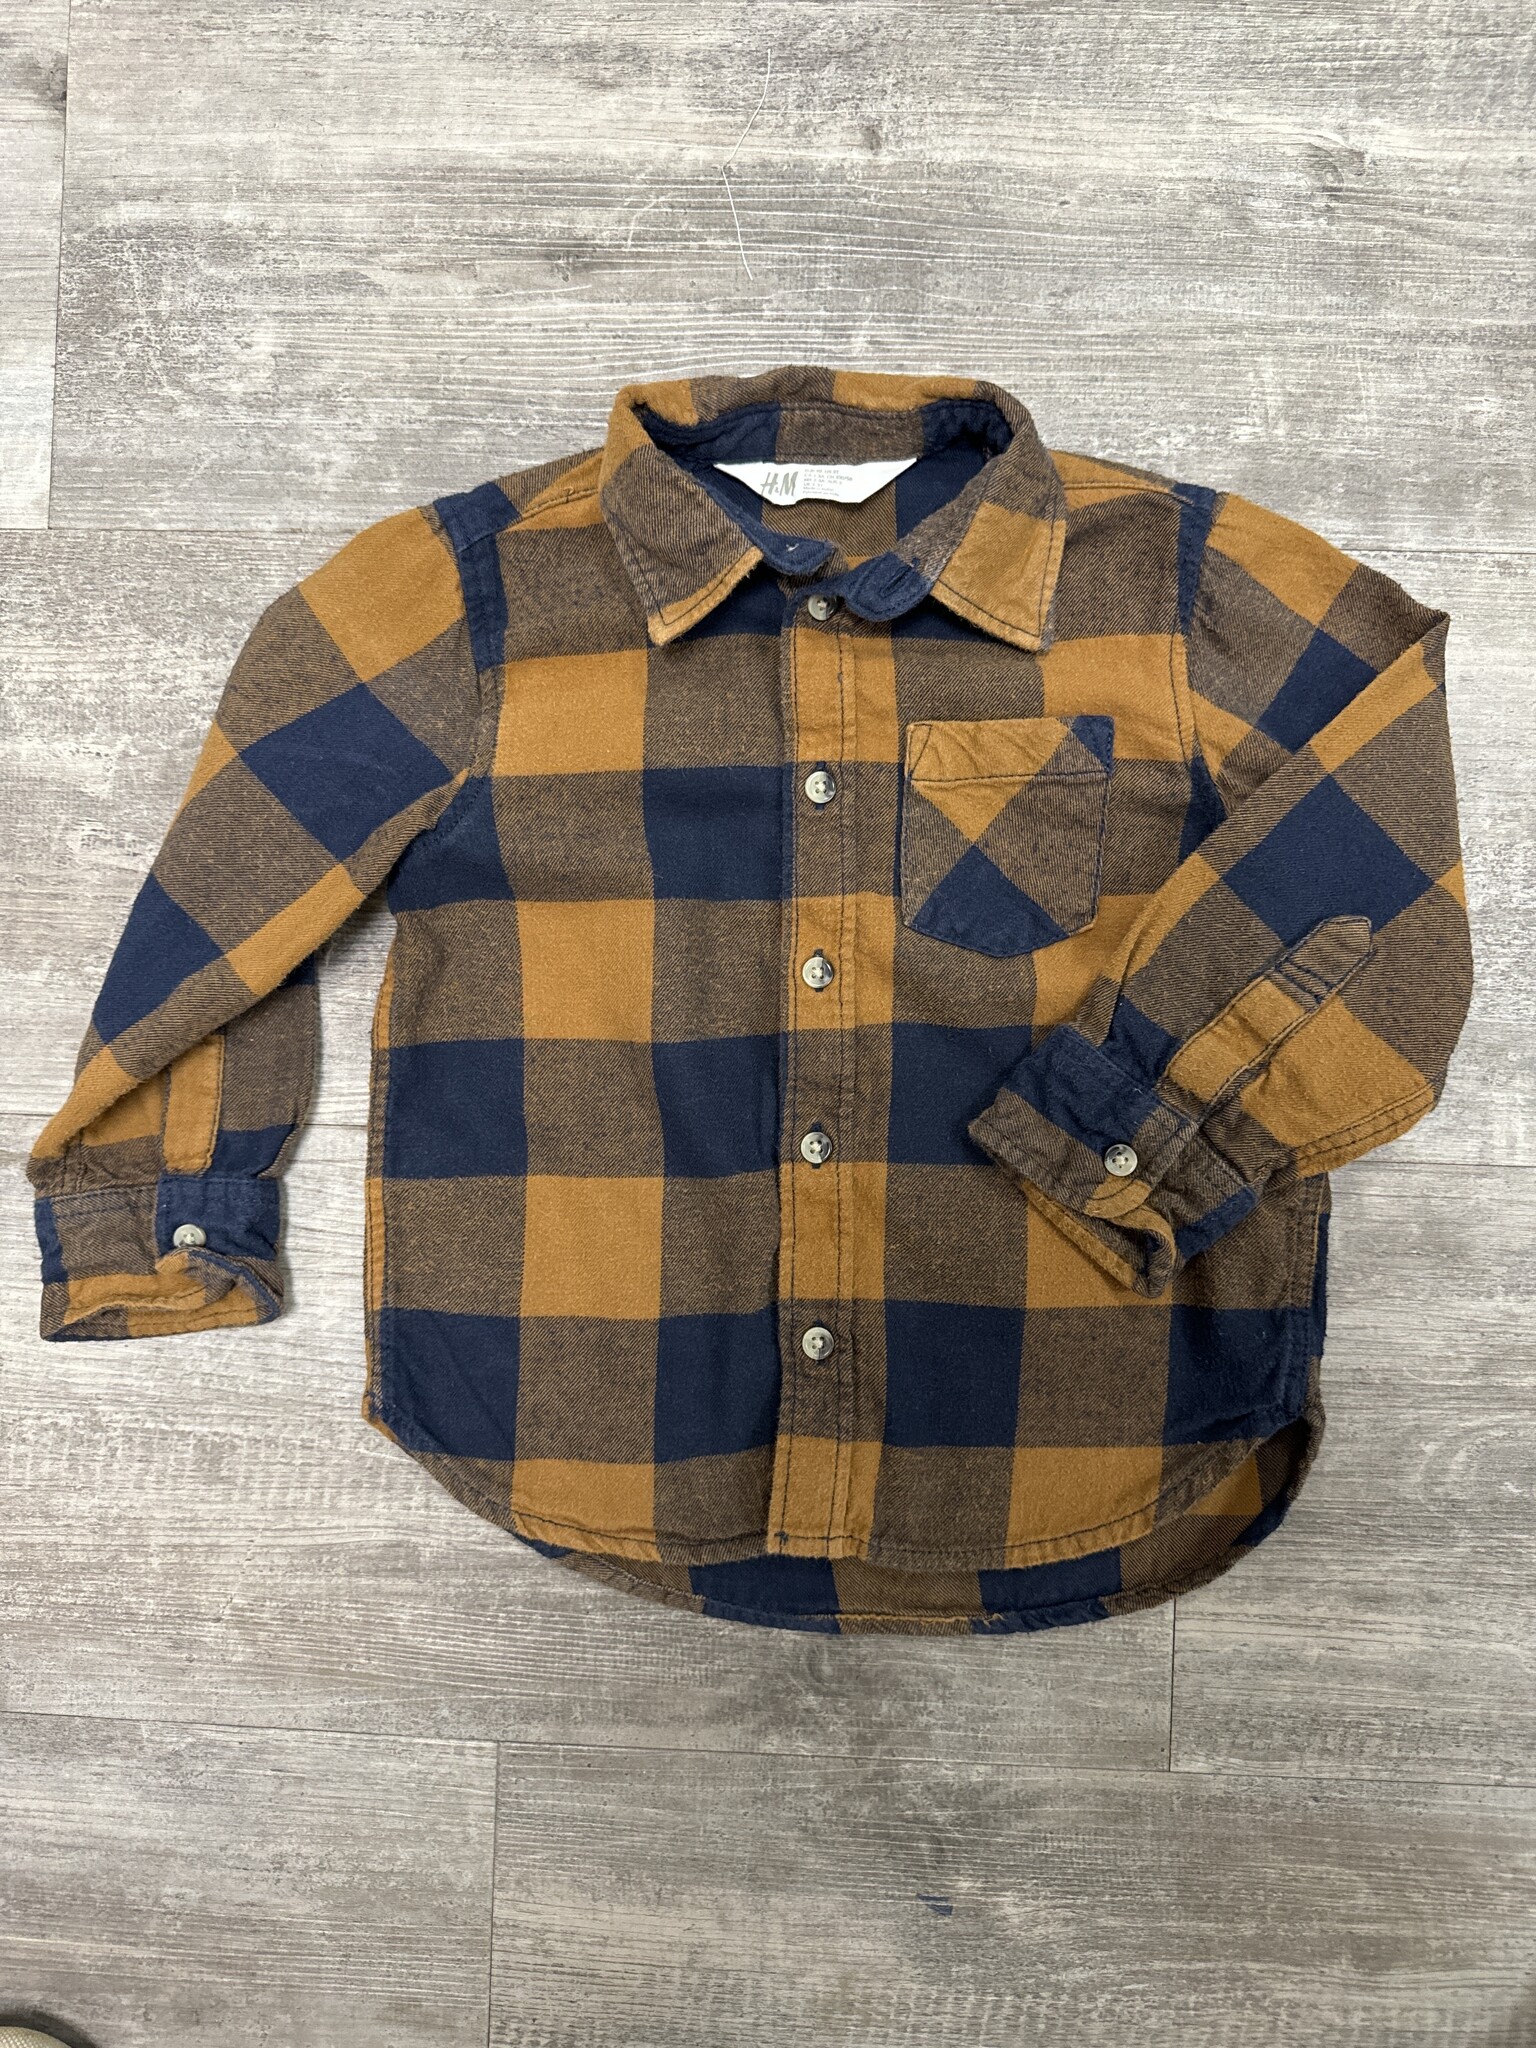 Navy and Brown Flannel Plaid Shirt - Size 98